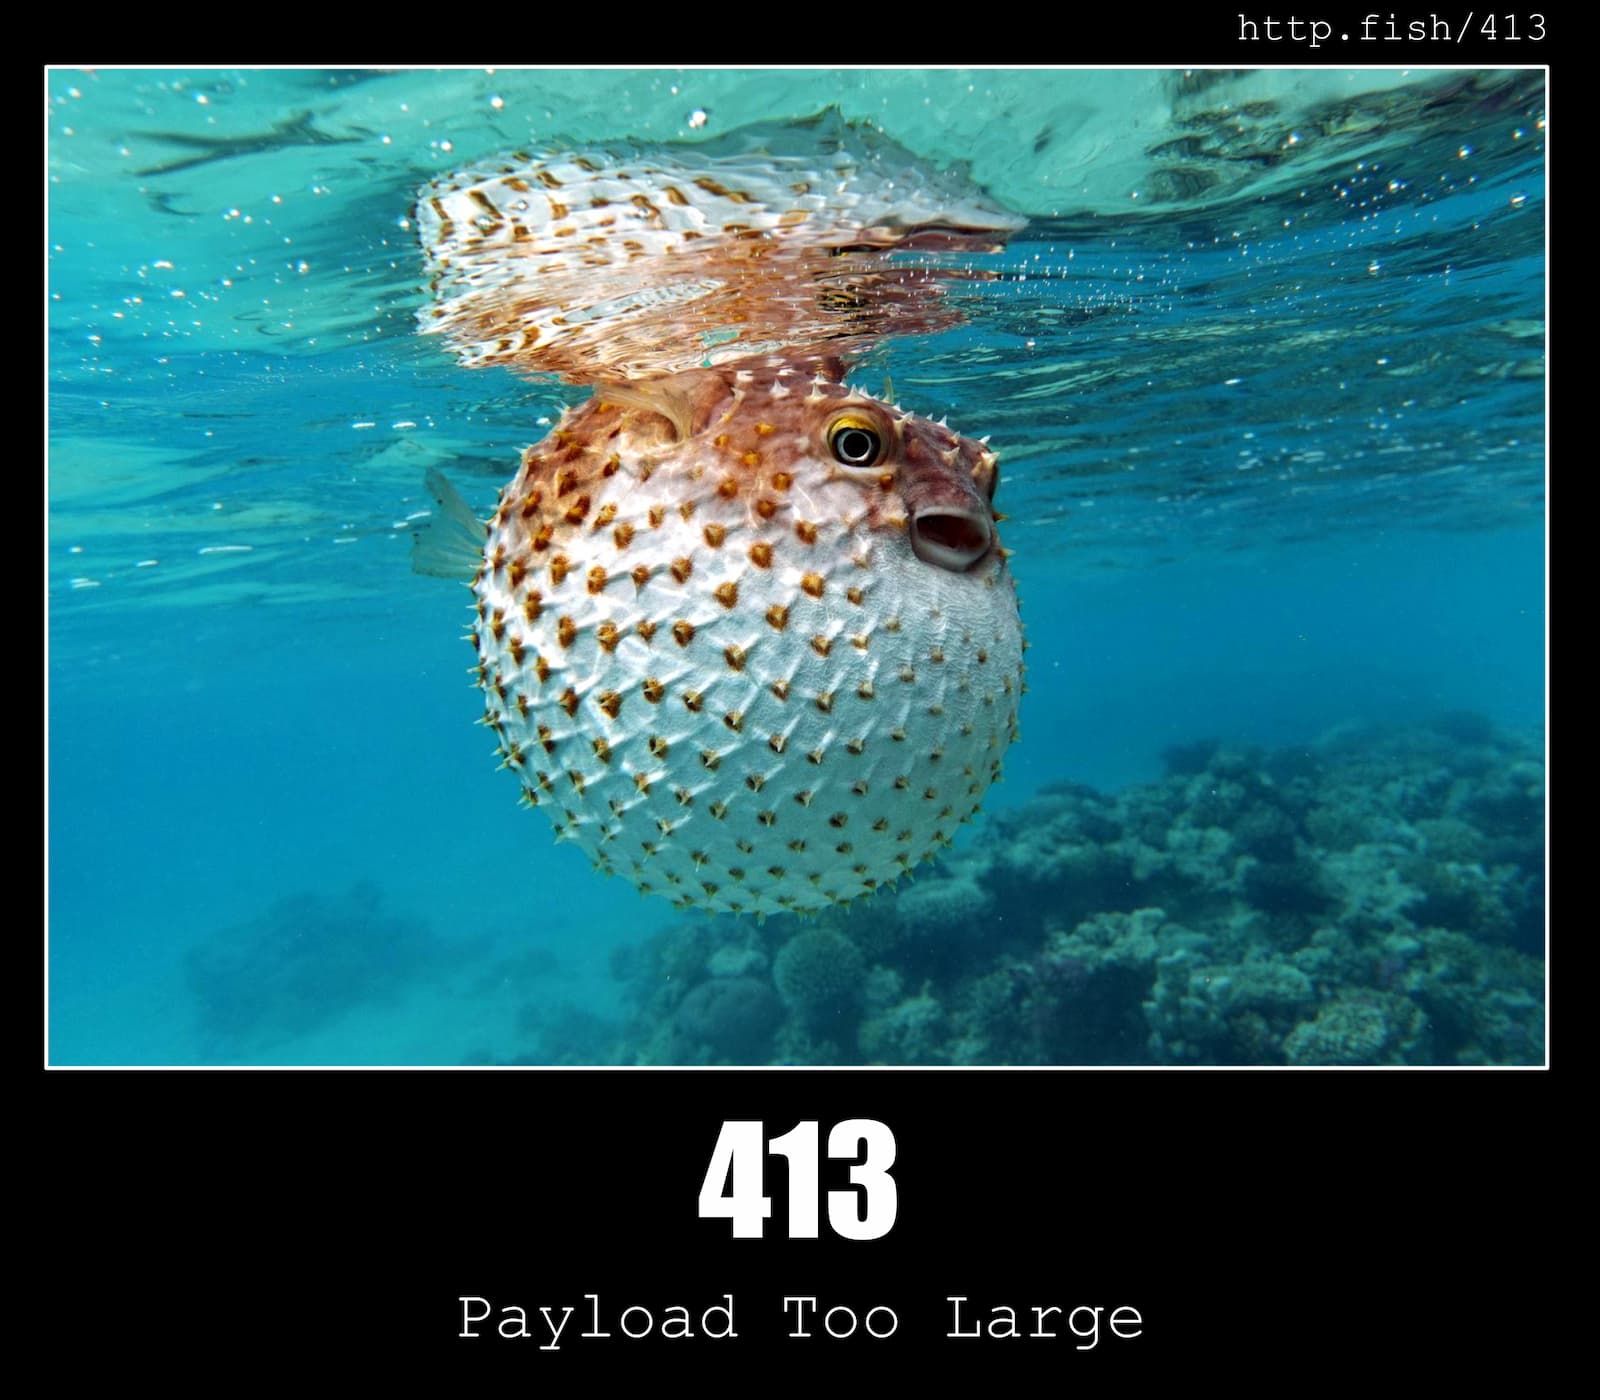 HTTP Status Code 413 Payload Too Large & Fish